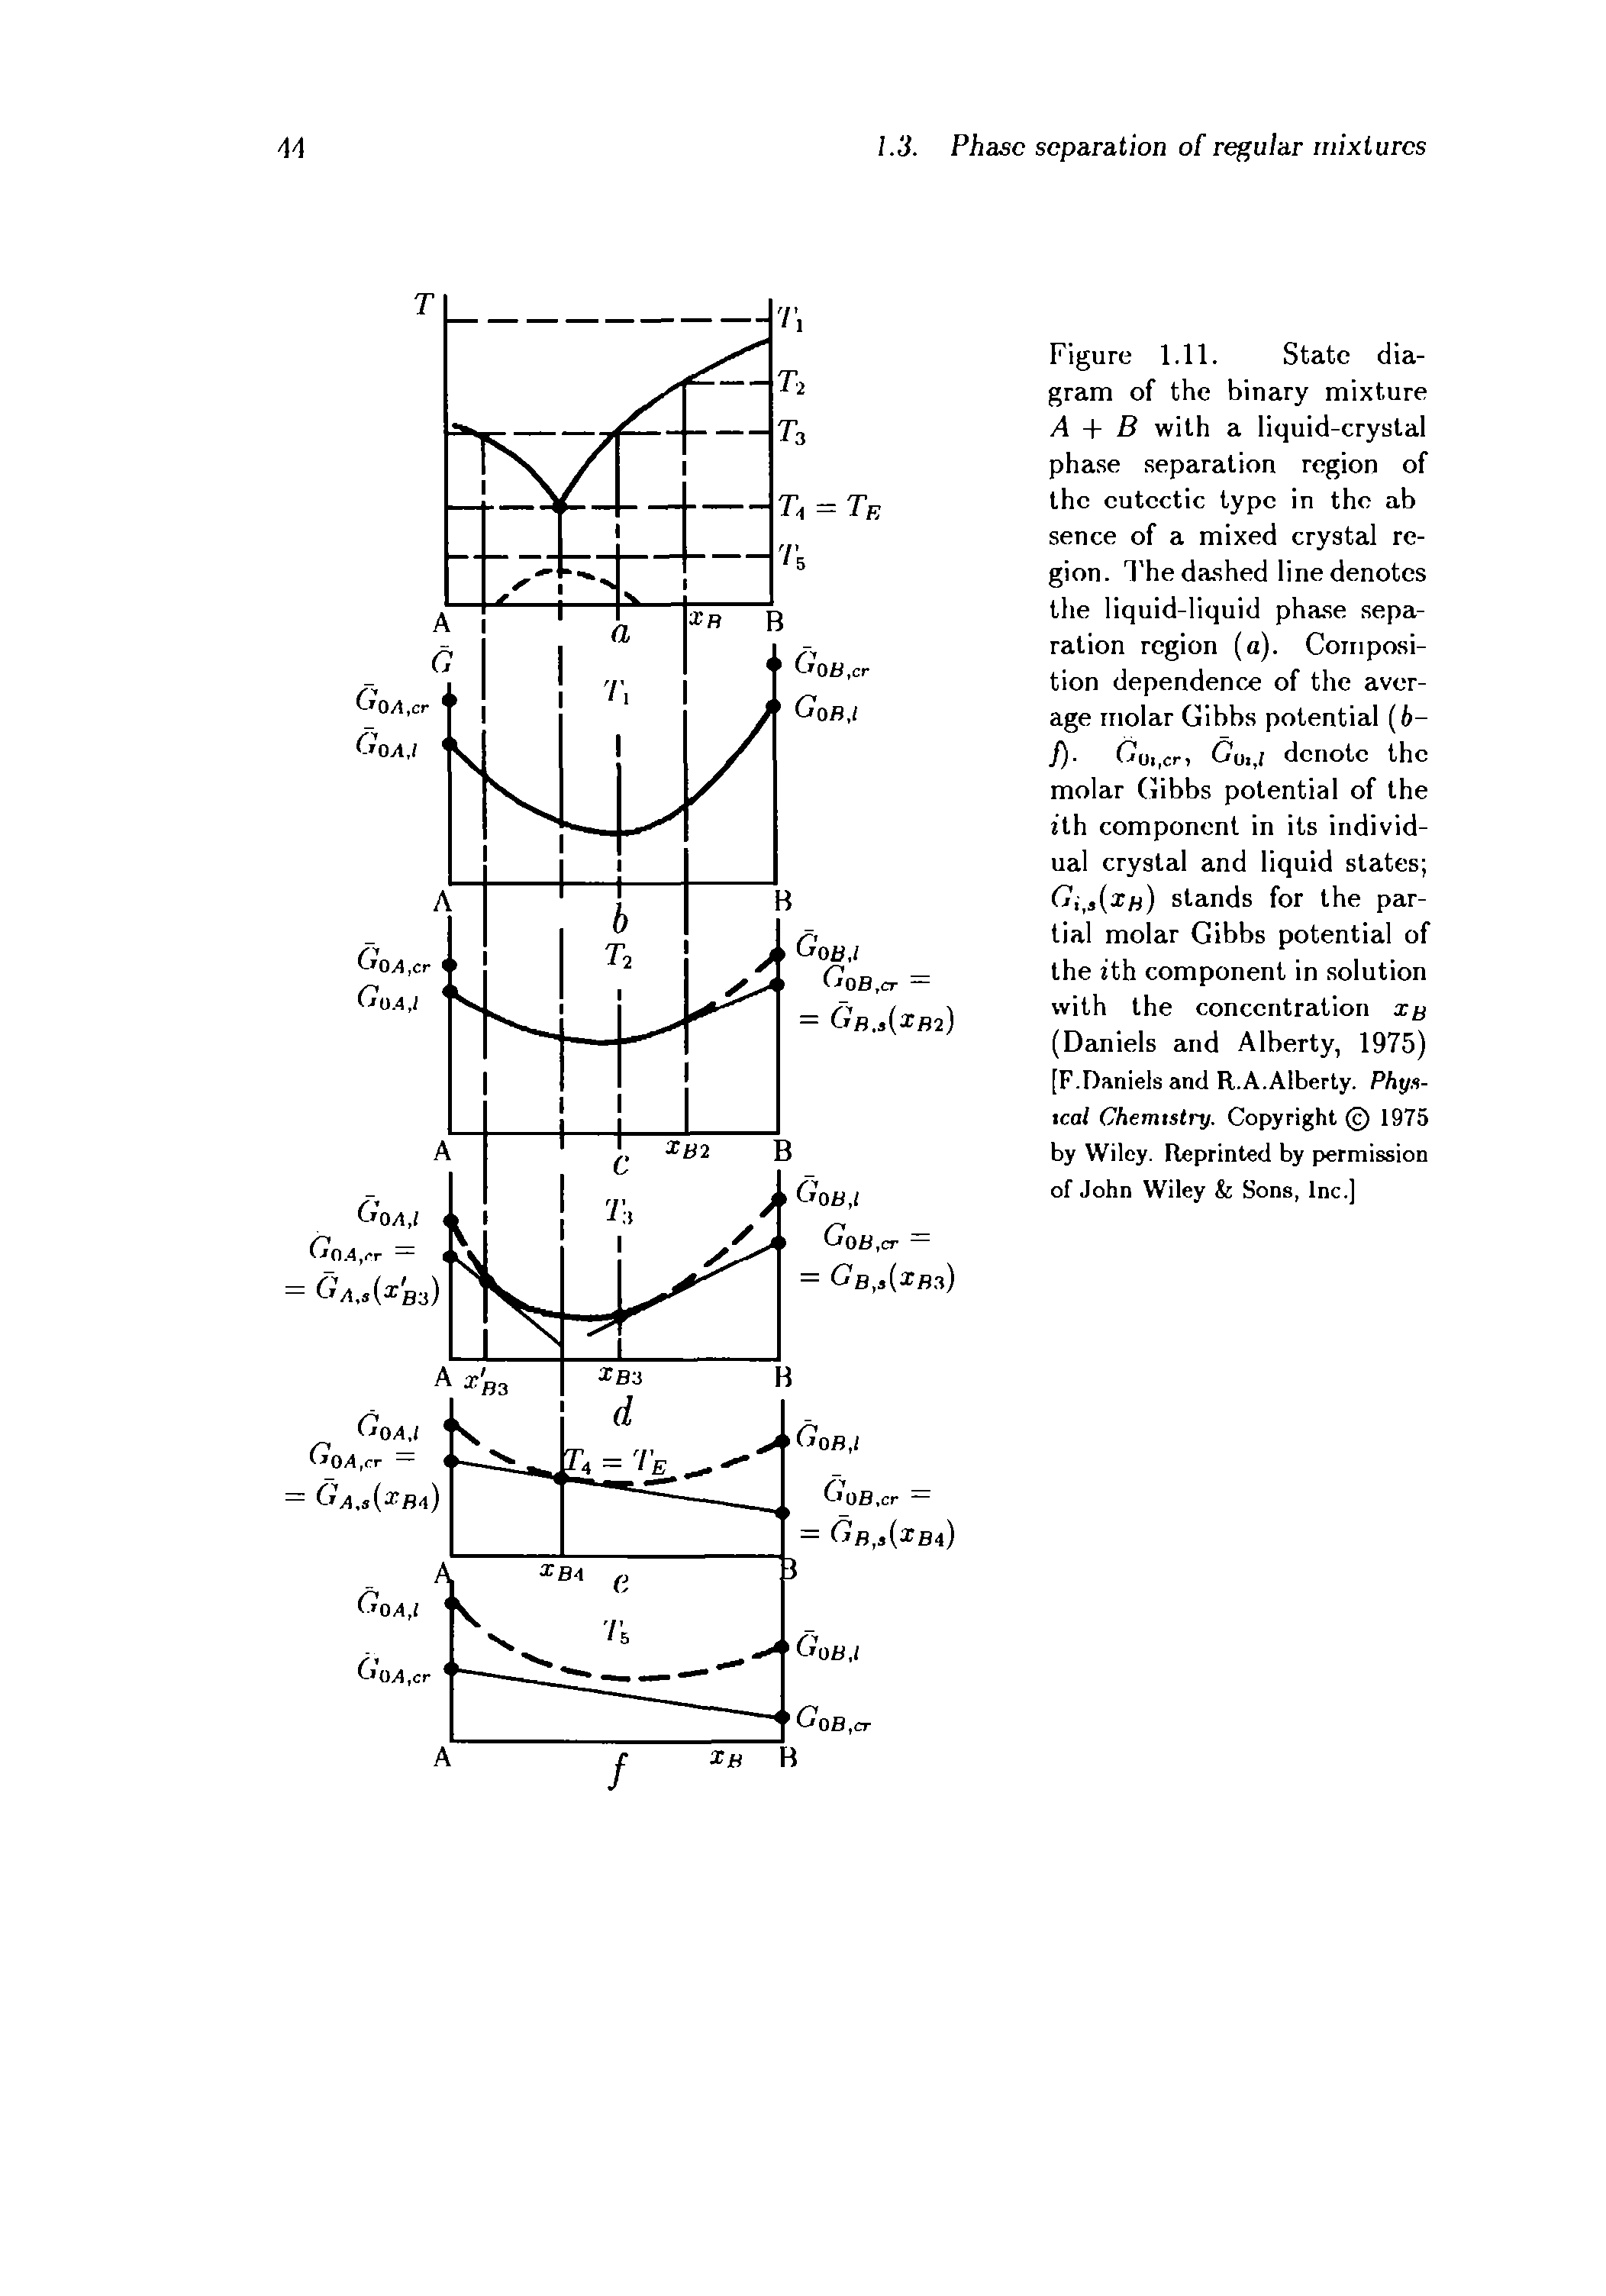 Figure 1.11. State diagram of the binary mixture A + B with a liquid-crystal phase separation region of the eutectic type in the ab sence of a mixed crystal region. 1 he dashed line denotes the liquid-liquid phase separation region (a). Composition dependenc.e of the average molar Gibbs potential (6-/) Coi.cr, Go.,( denote the molar Gibbs potential of the zth component in its individual crystal and liquid states ...